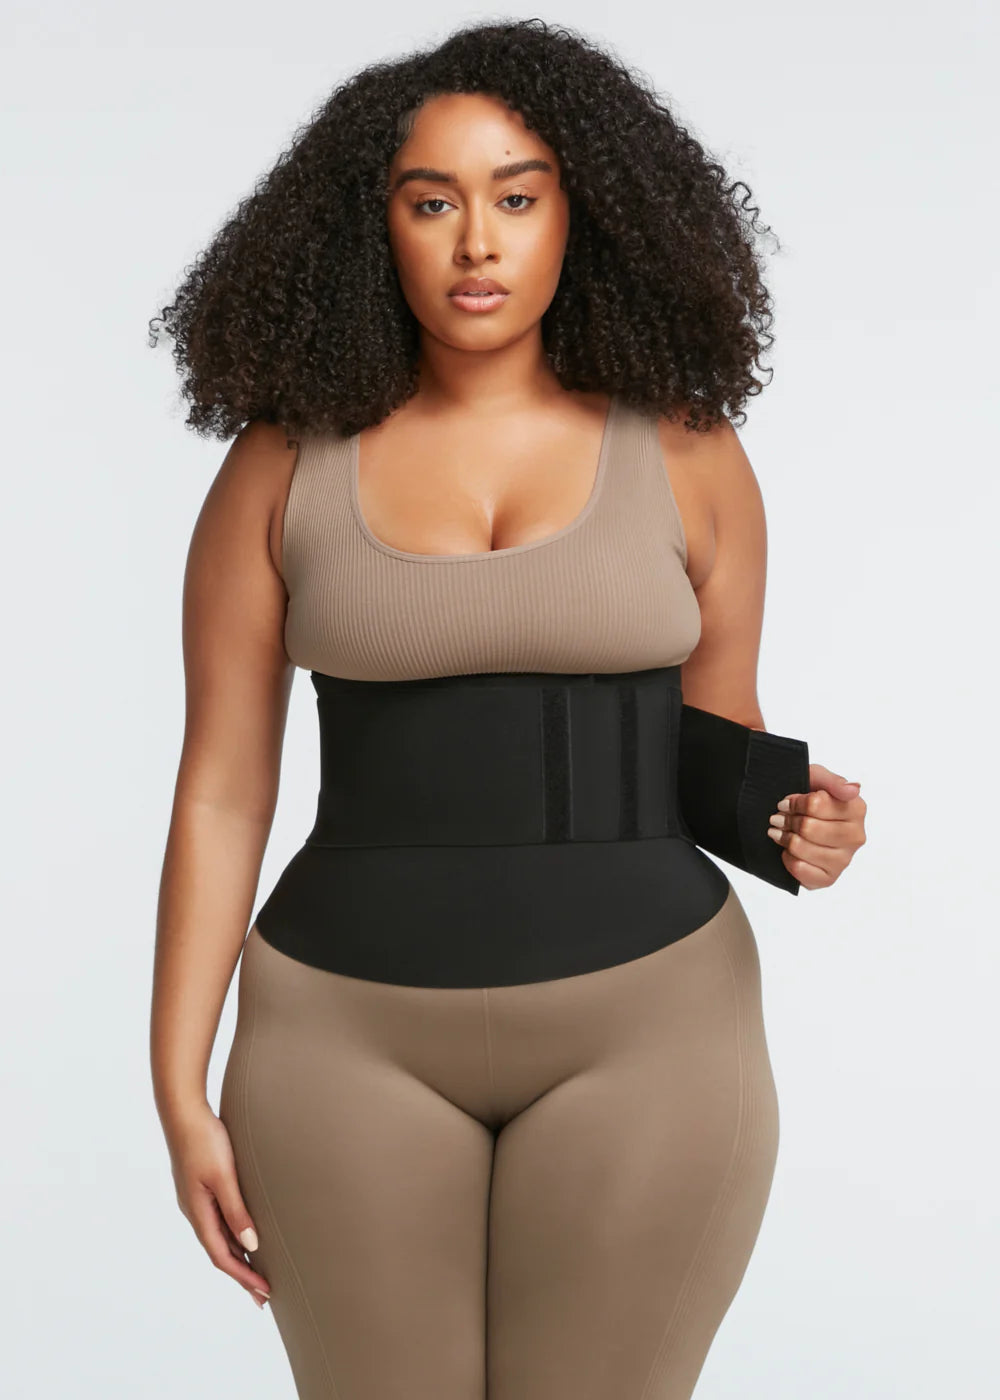 How Tight Should a Waist Trainer Be – FiguresbyChristina